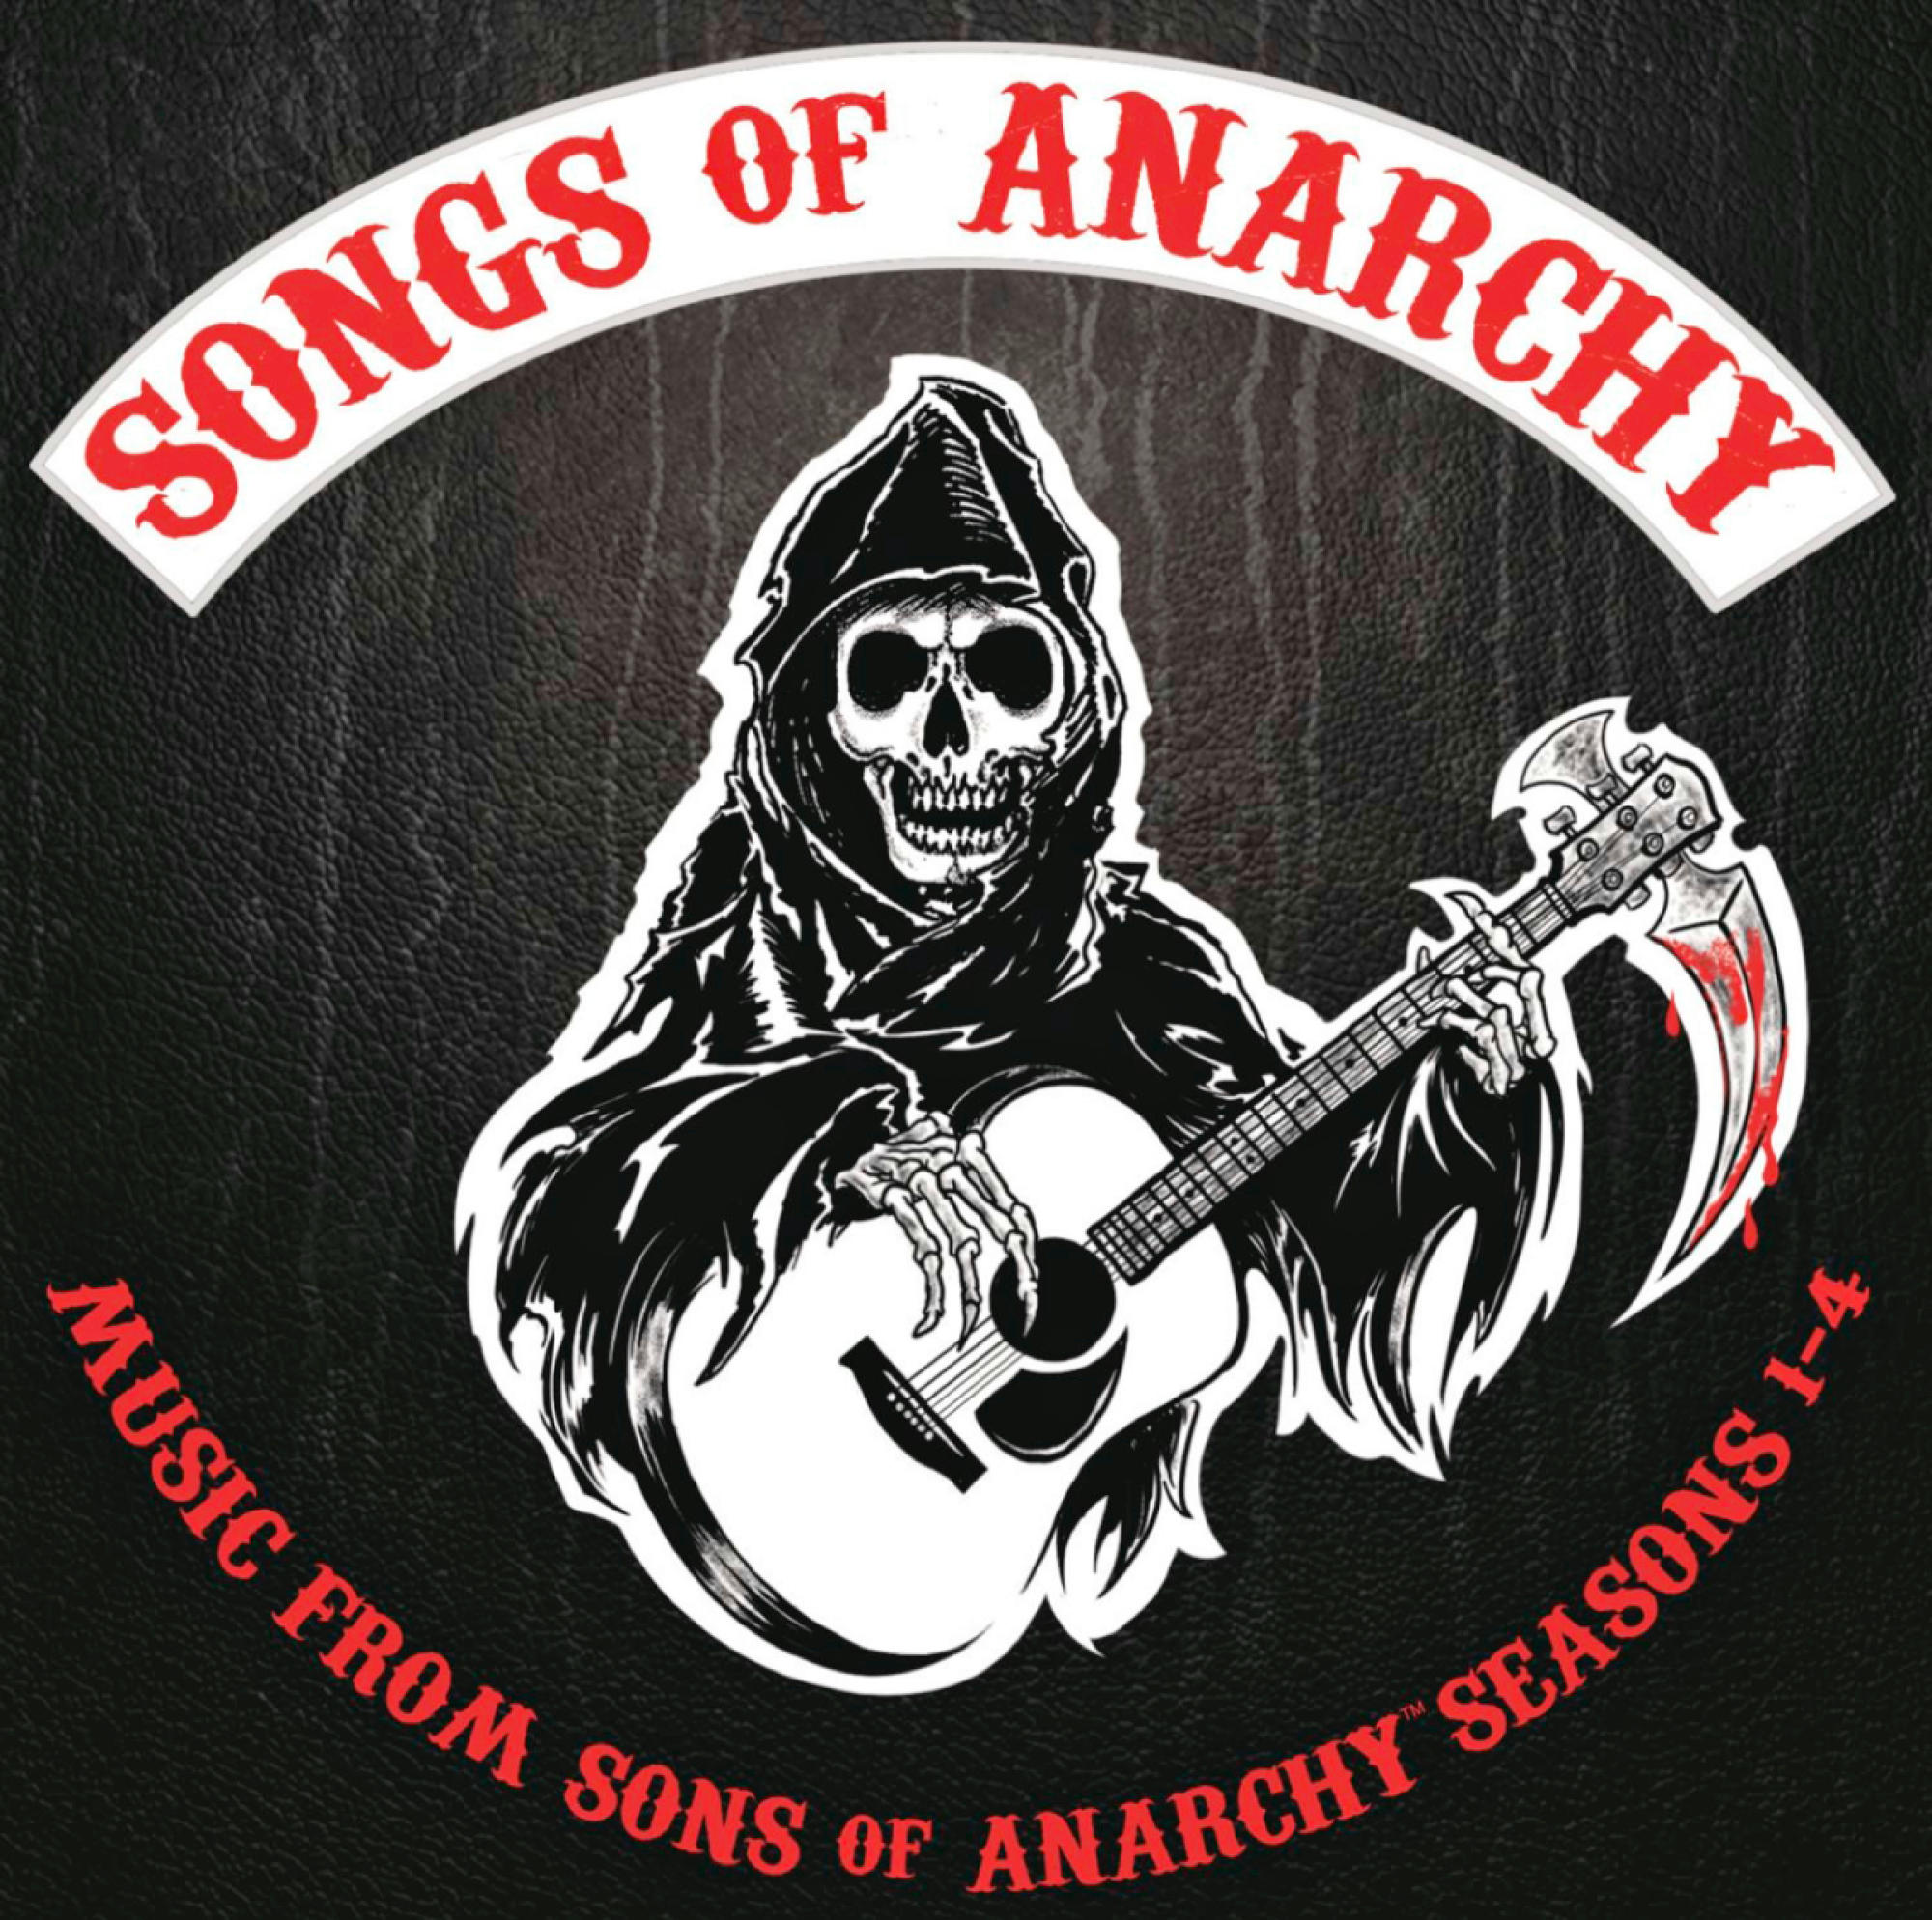 Songs Of - Music (CD) VARIOUS Of Anarchy: 1-4 - Anarchy From Sons Season